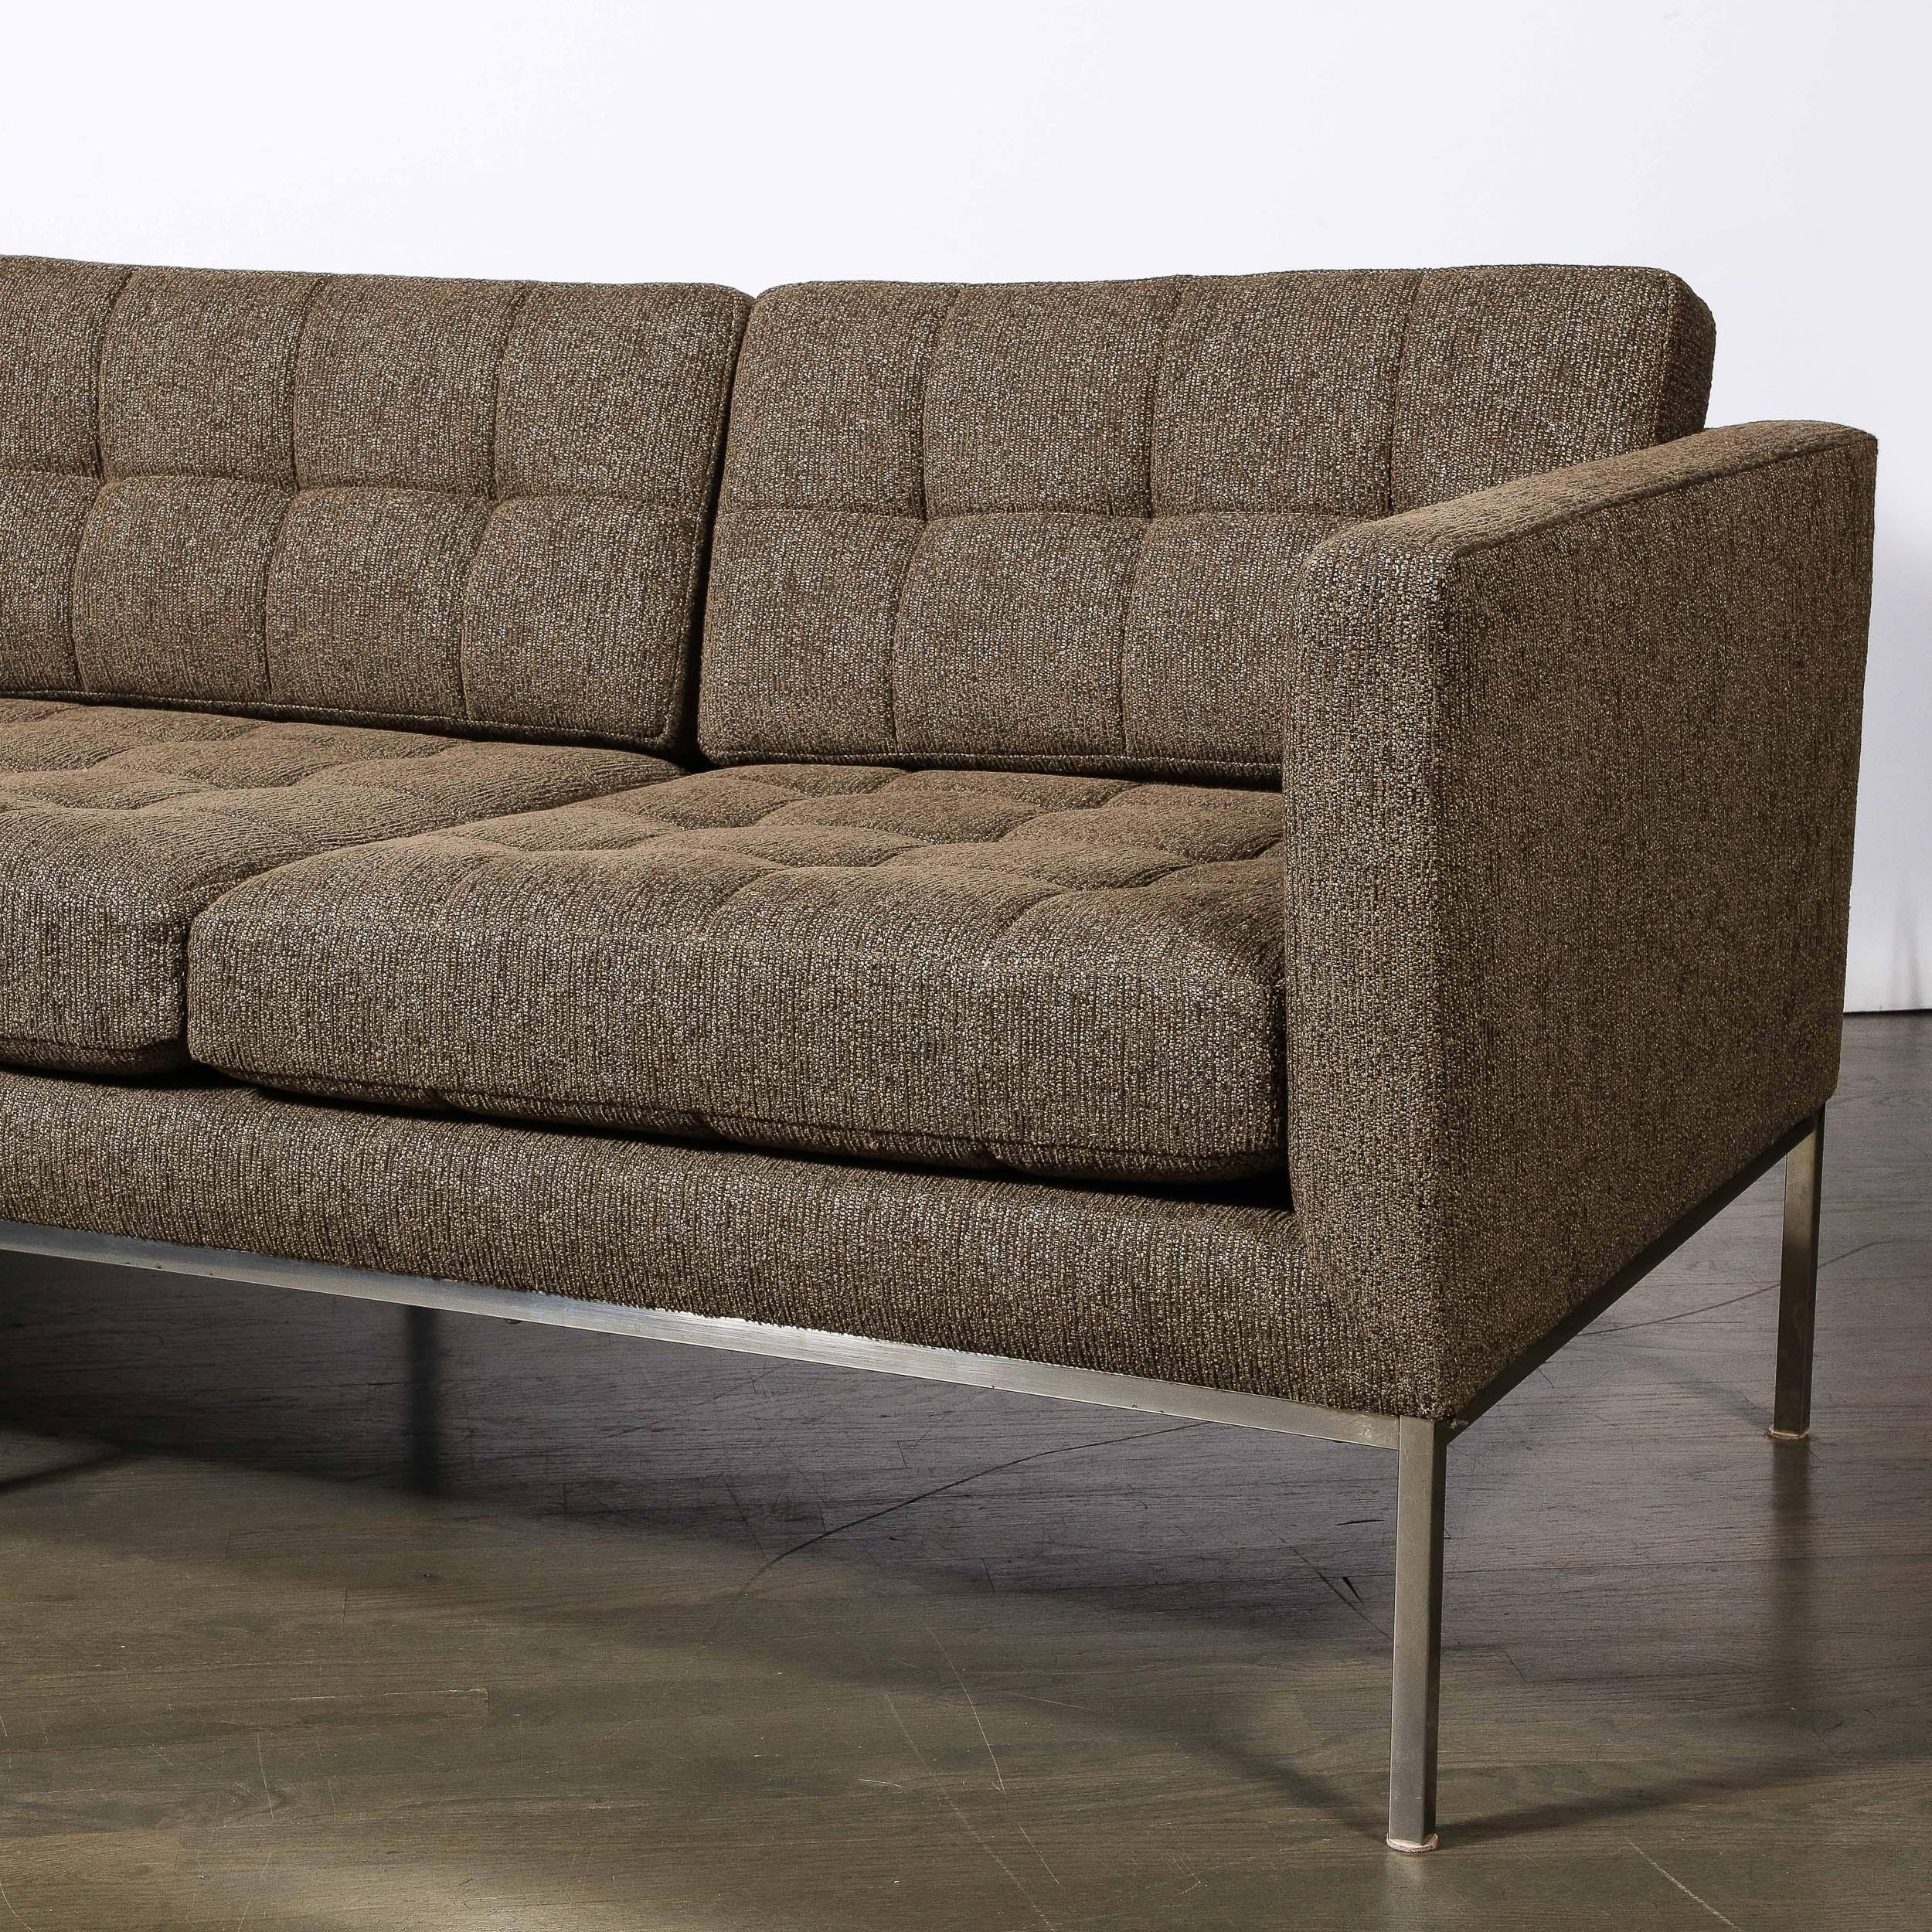 American Modernist Biscuit Tufted 'Relaxed' Sofa in Holly Hunt Fabric by Florence Knoll  For Sale